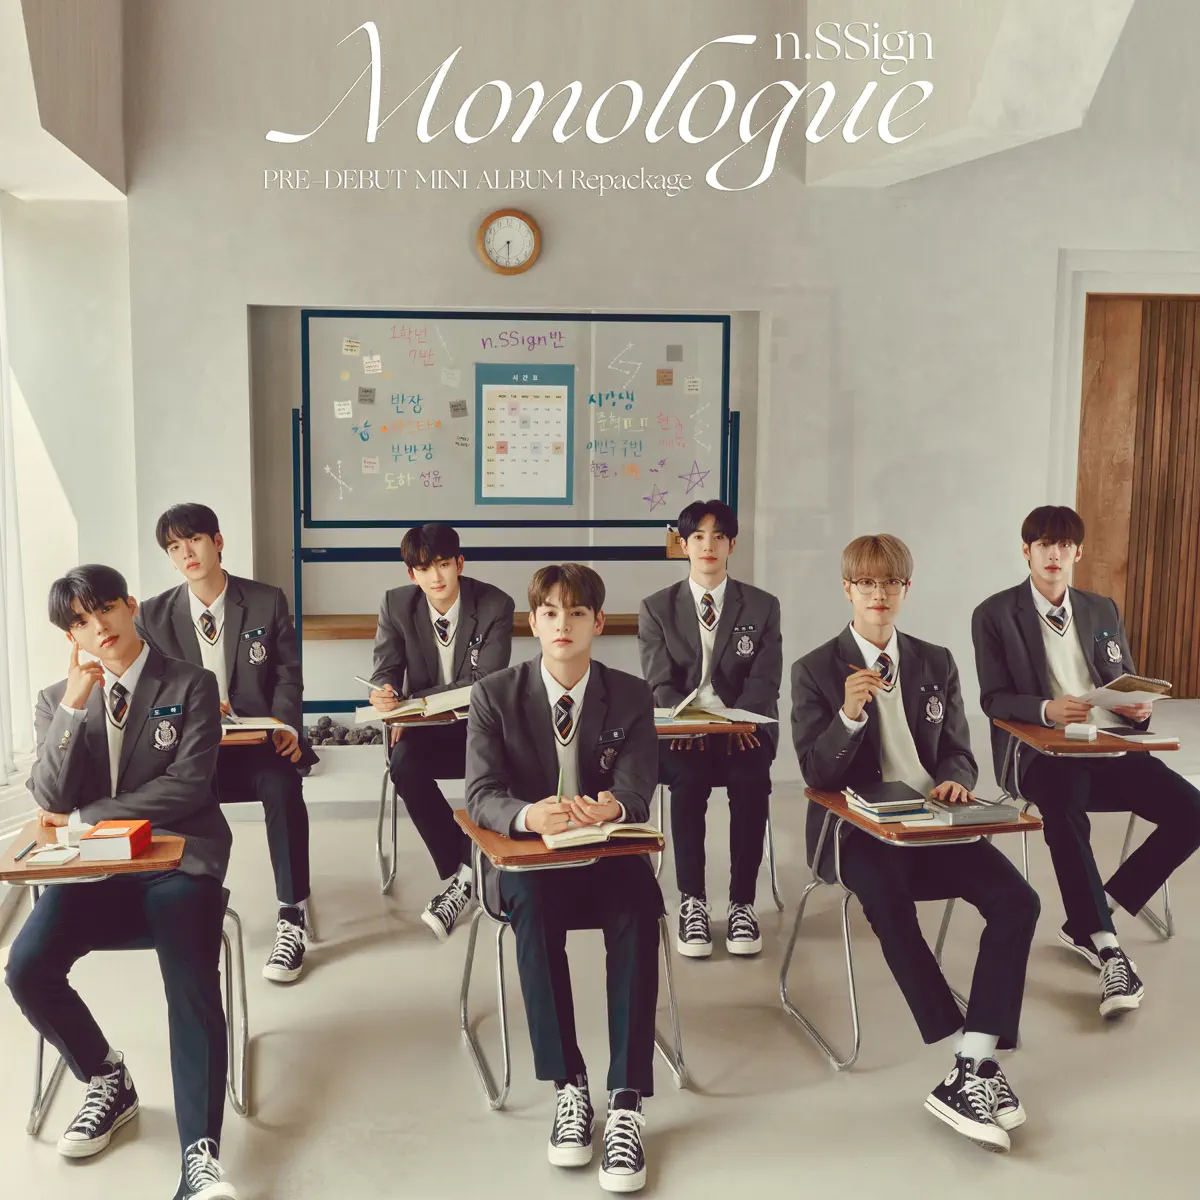 n.SSign - n.SSign PRE-DEBUT MINI ALBUM Repackage 'Monologue' (2023) [iTunes Plus AAC M4A]-新房子